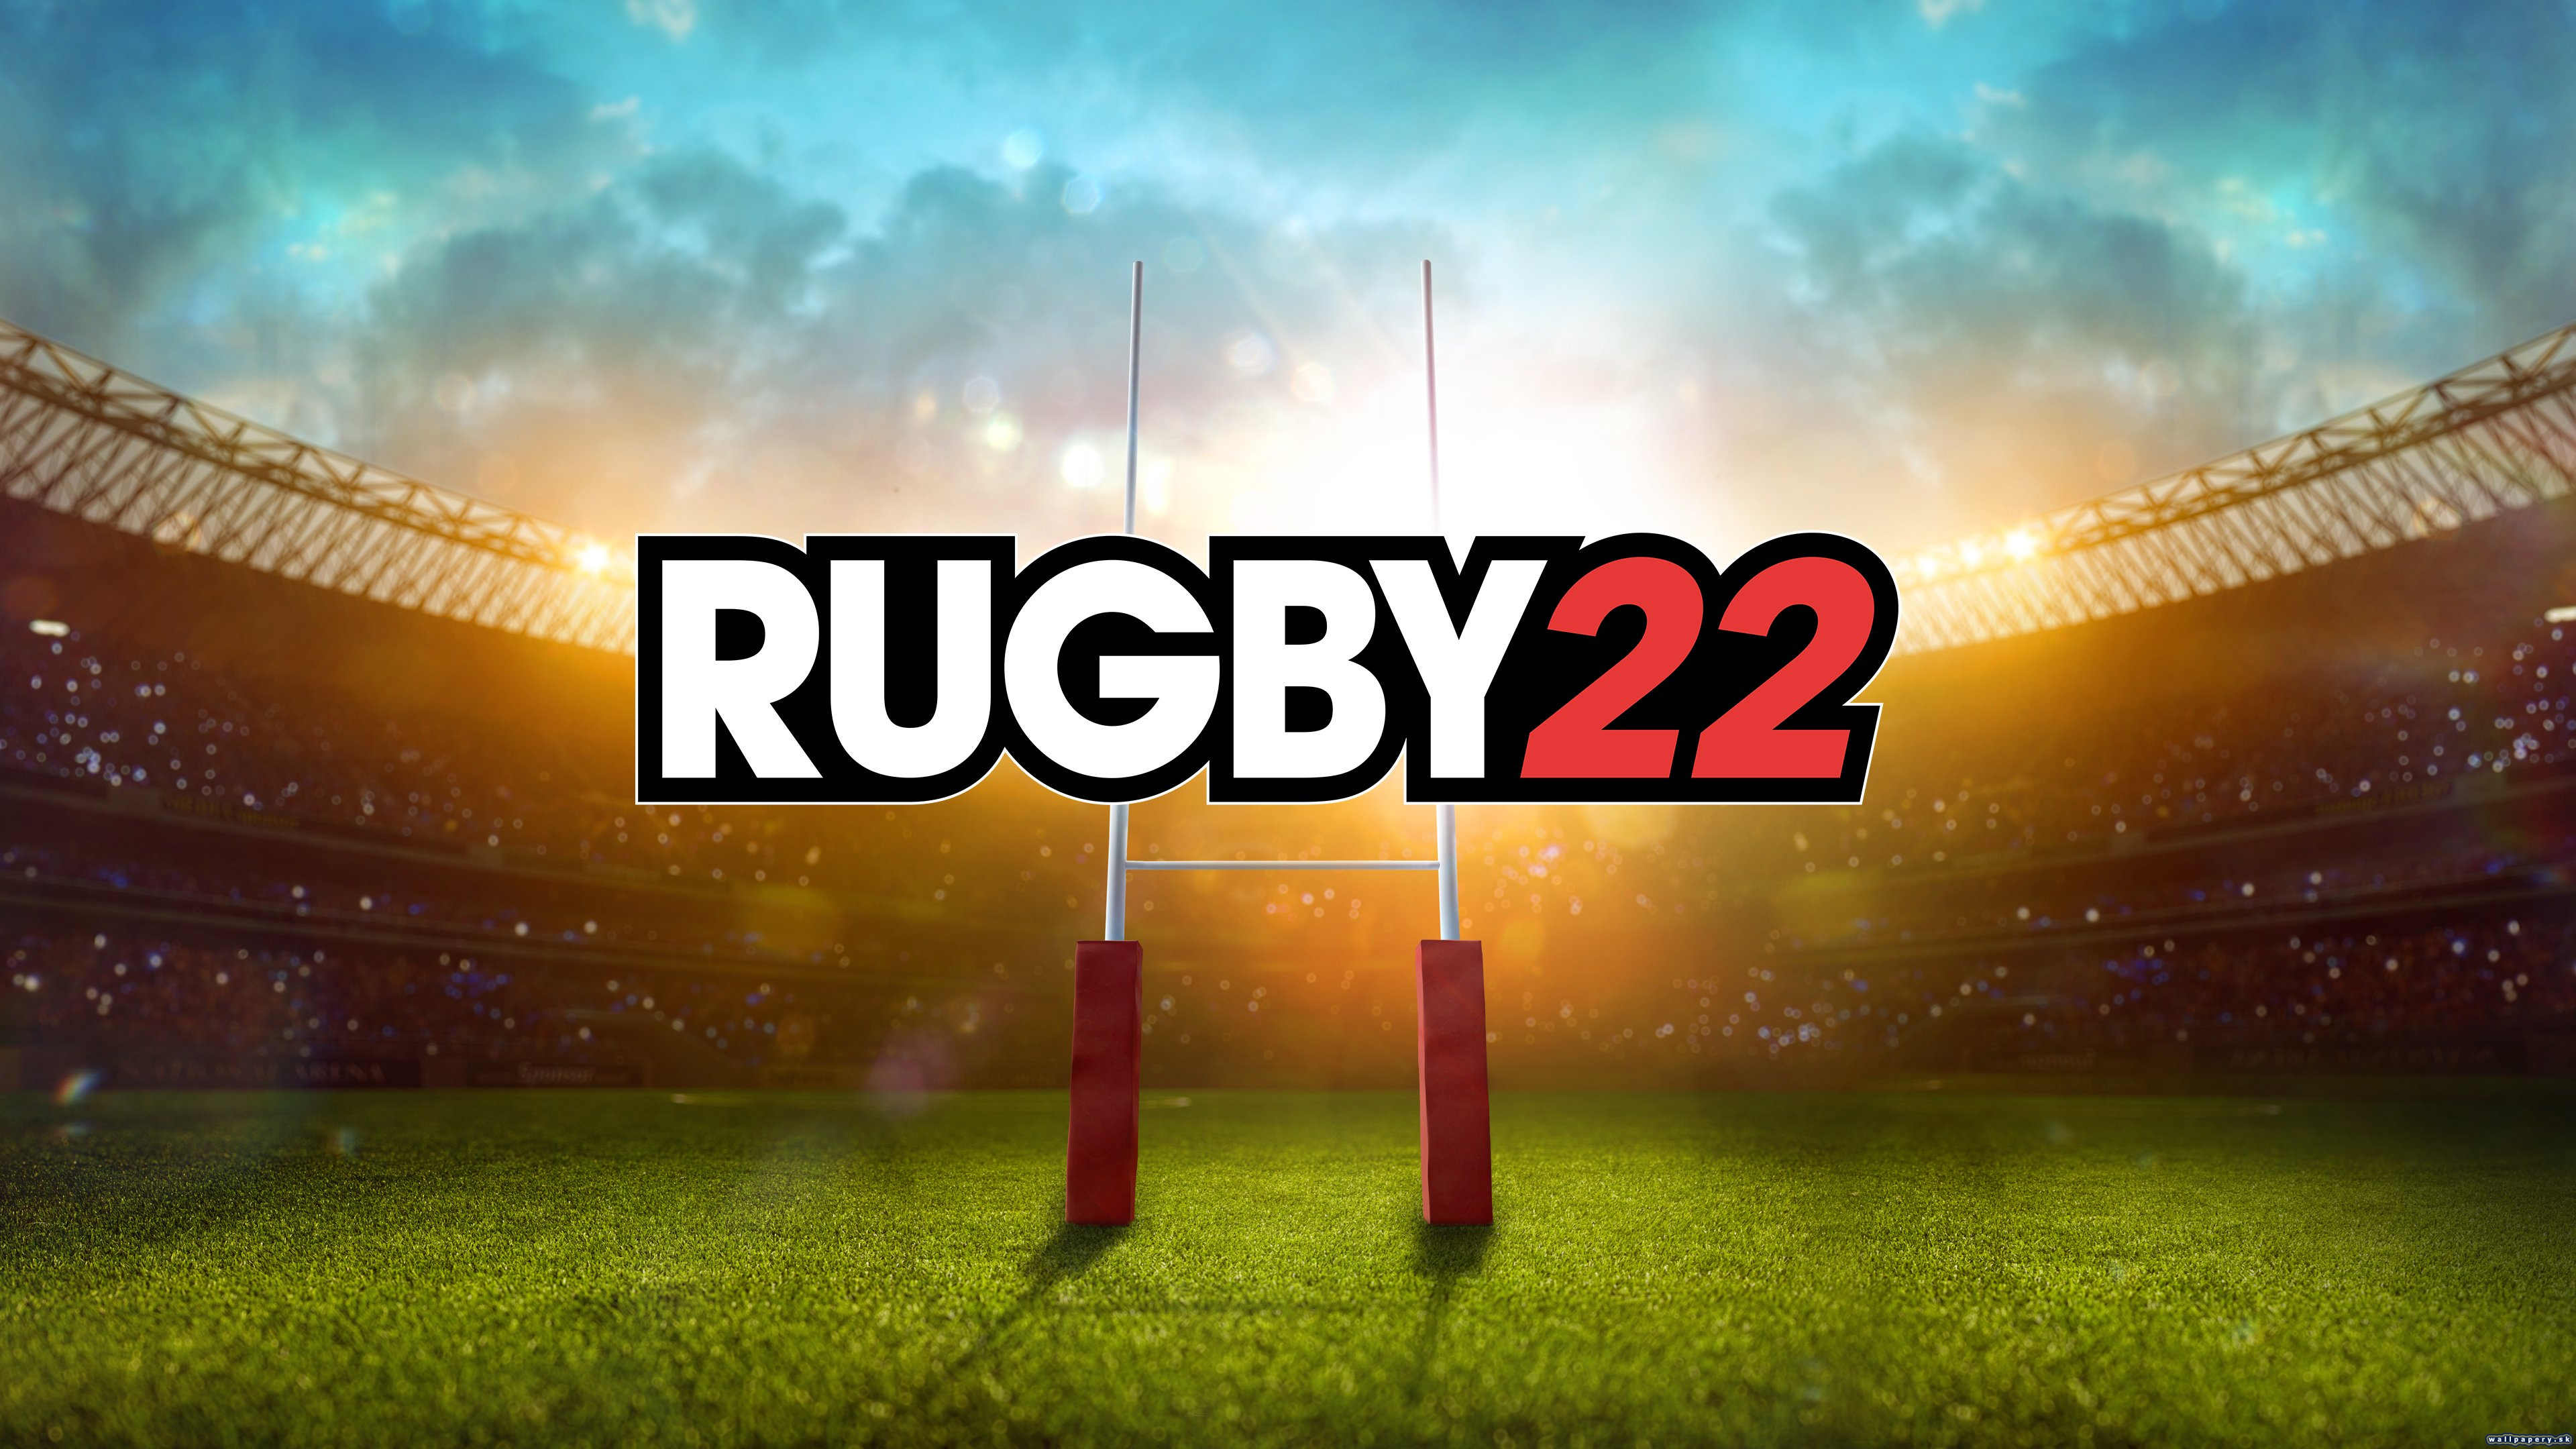 Rugby 22 - wallpaper 1